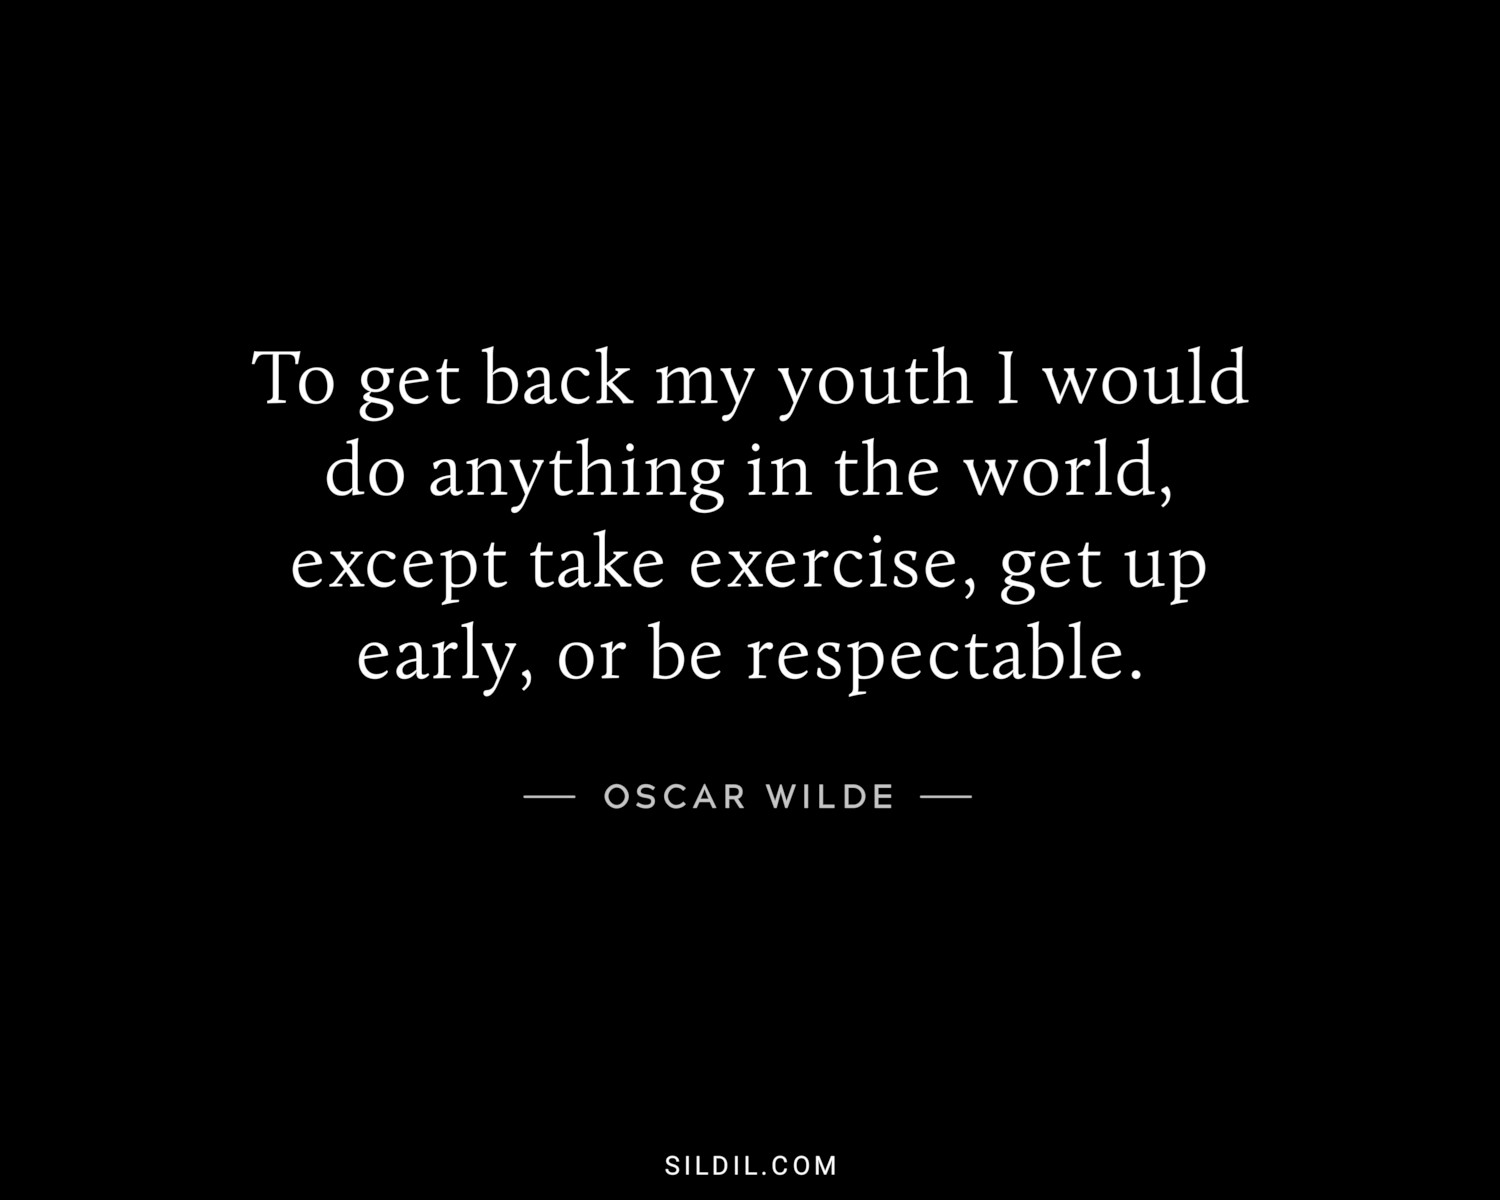 To get back my youth I would do anything in the world, except take exercise, get up early, or be respectable.